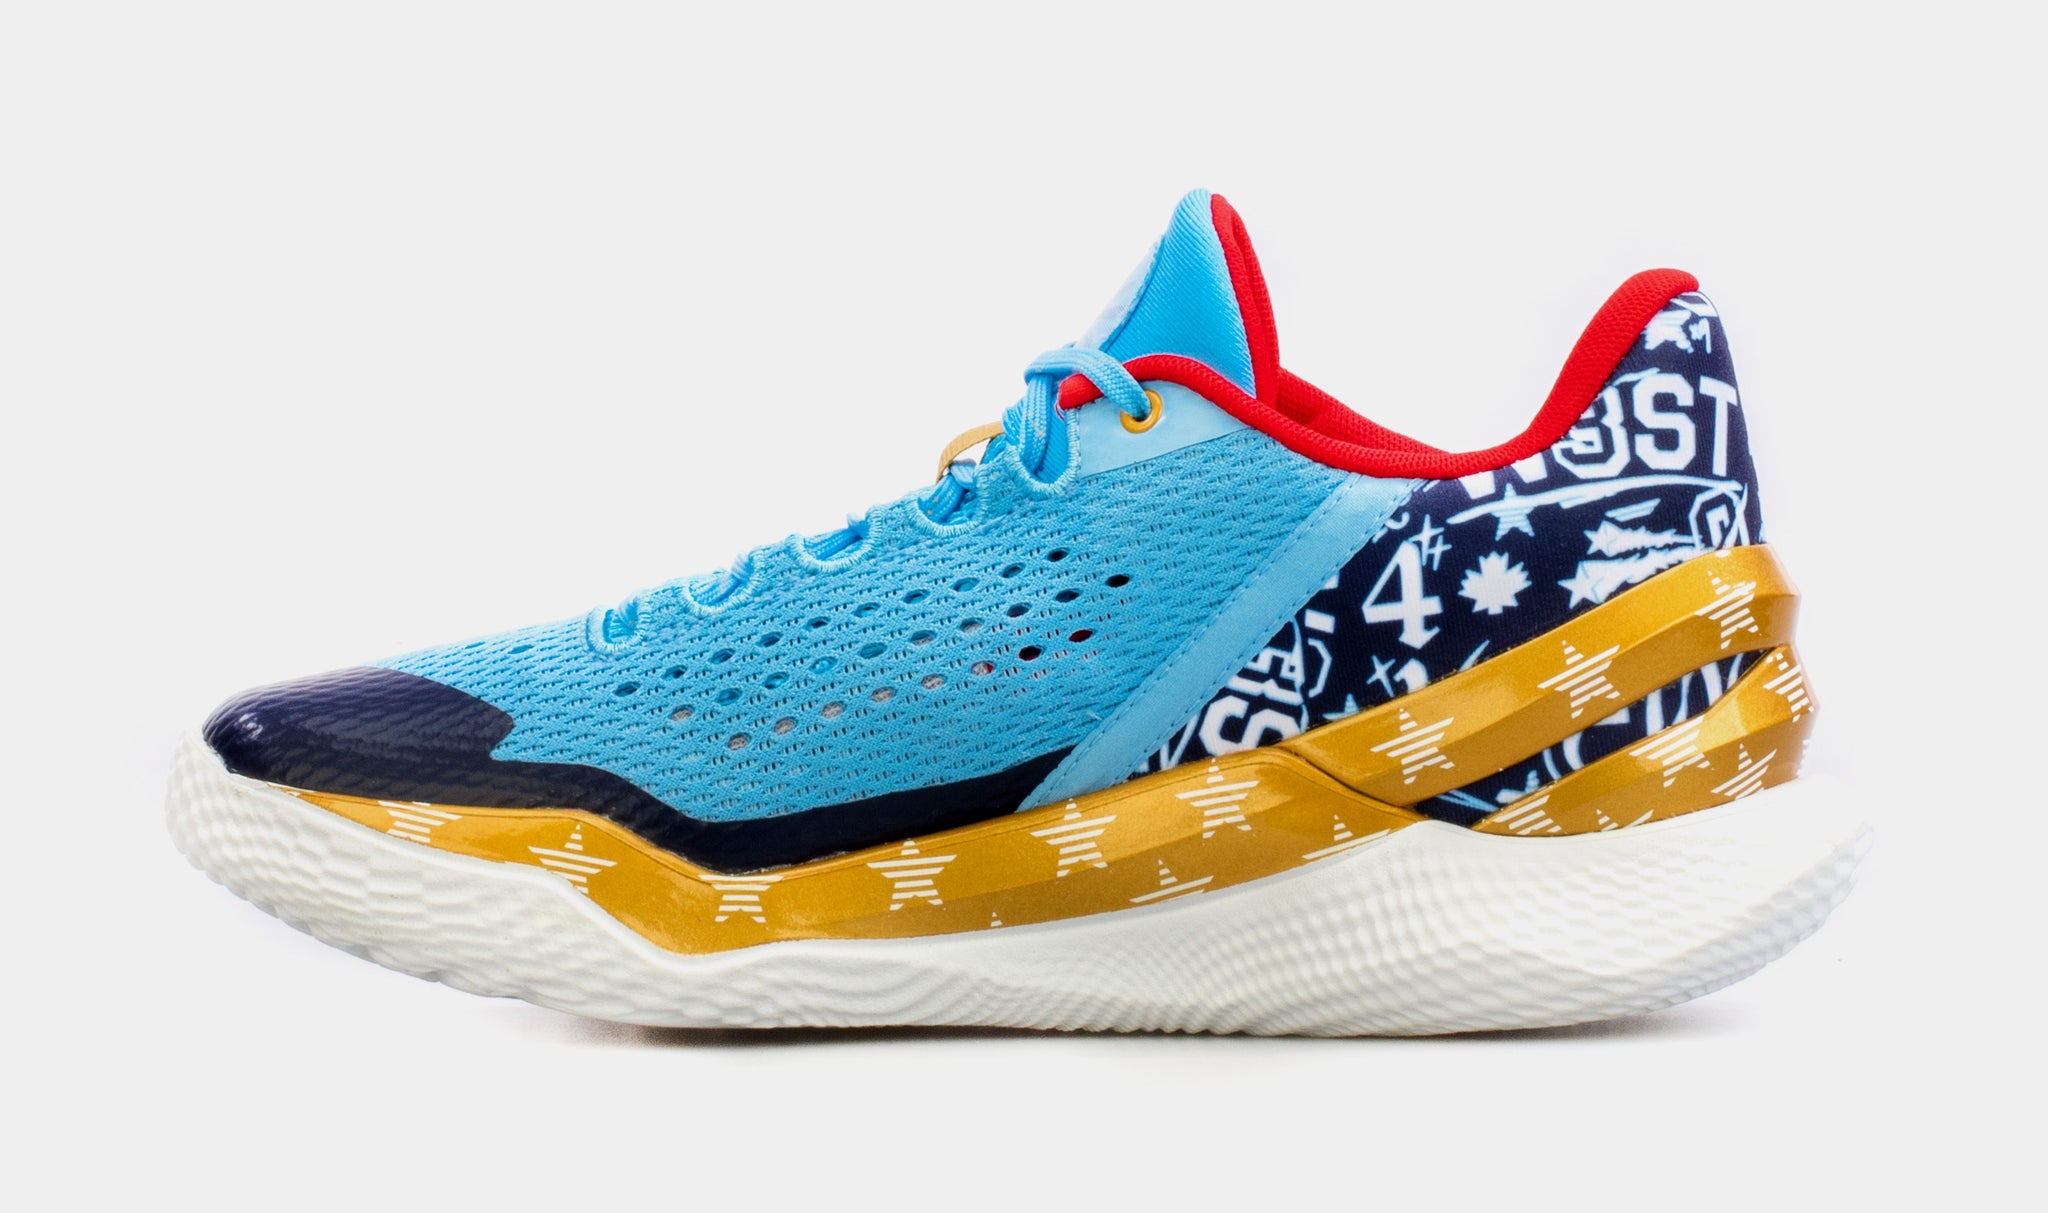 Under Armour Curry 1 Sneakers for Men for Sale, Shop Men's Sneakers